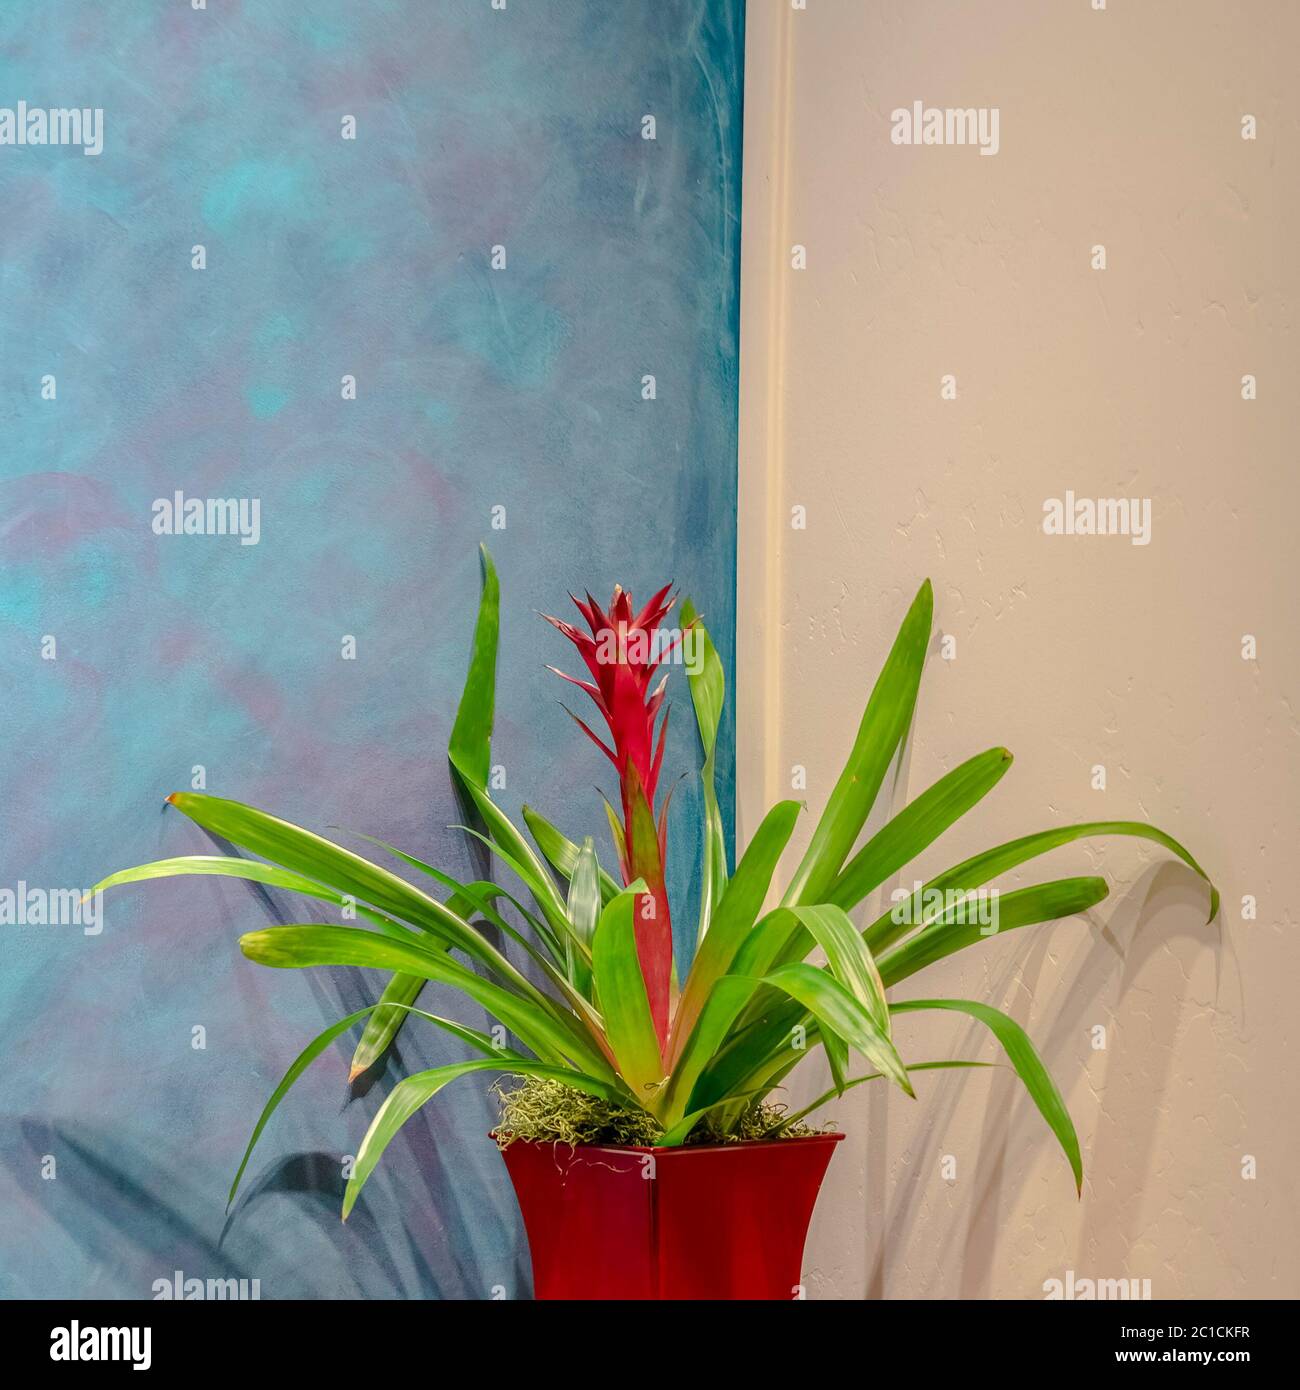 Square crop Potted bromeliad with colorful red flower interior Stock Photo